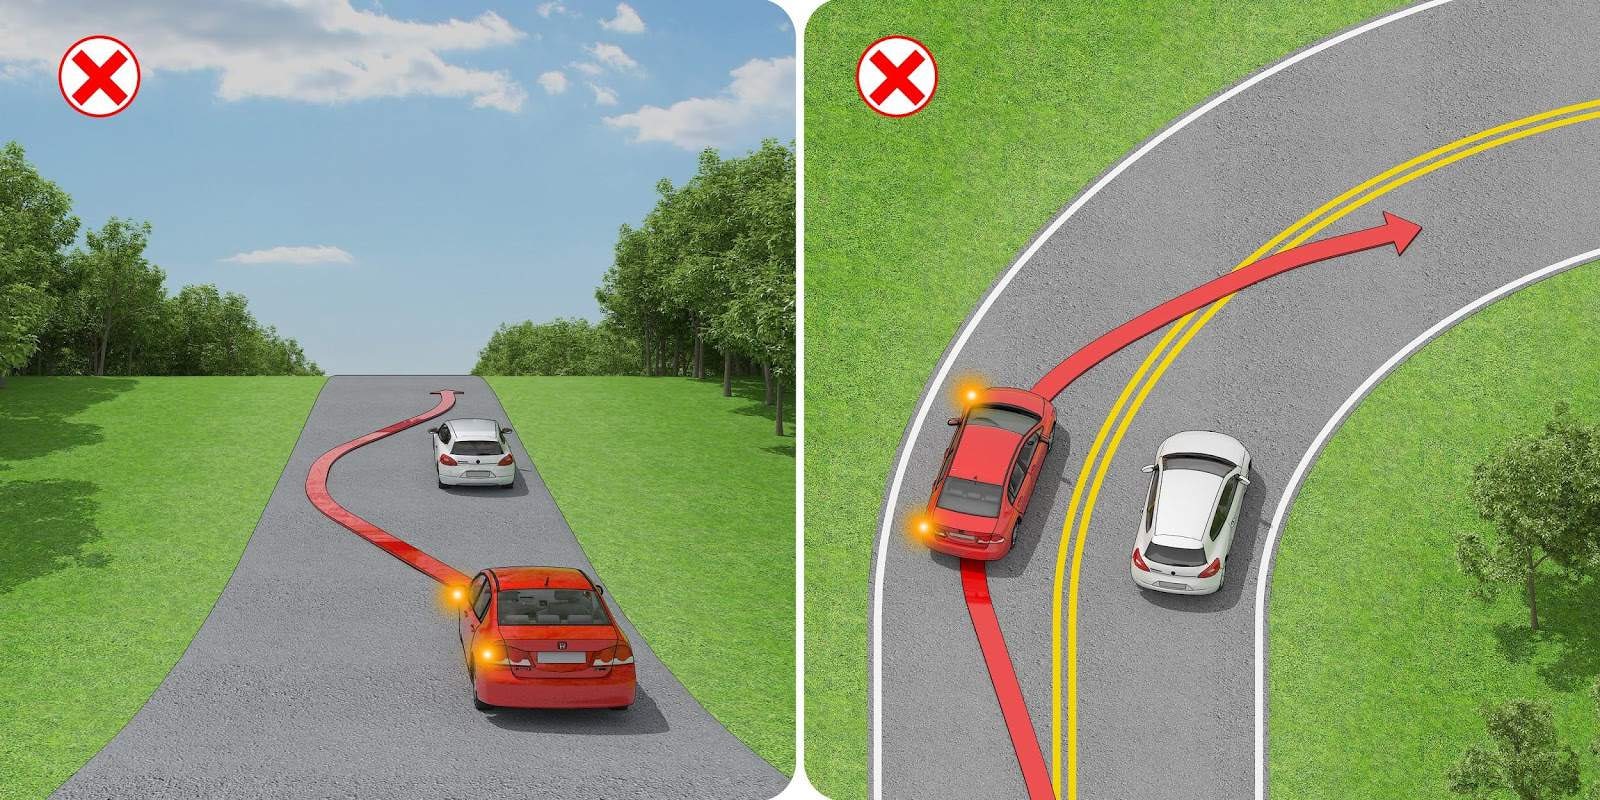 Illustration showing the dangers of passing in a curve or near a hill